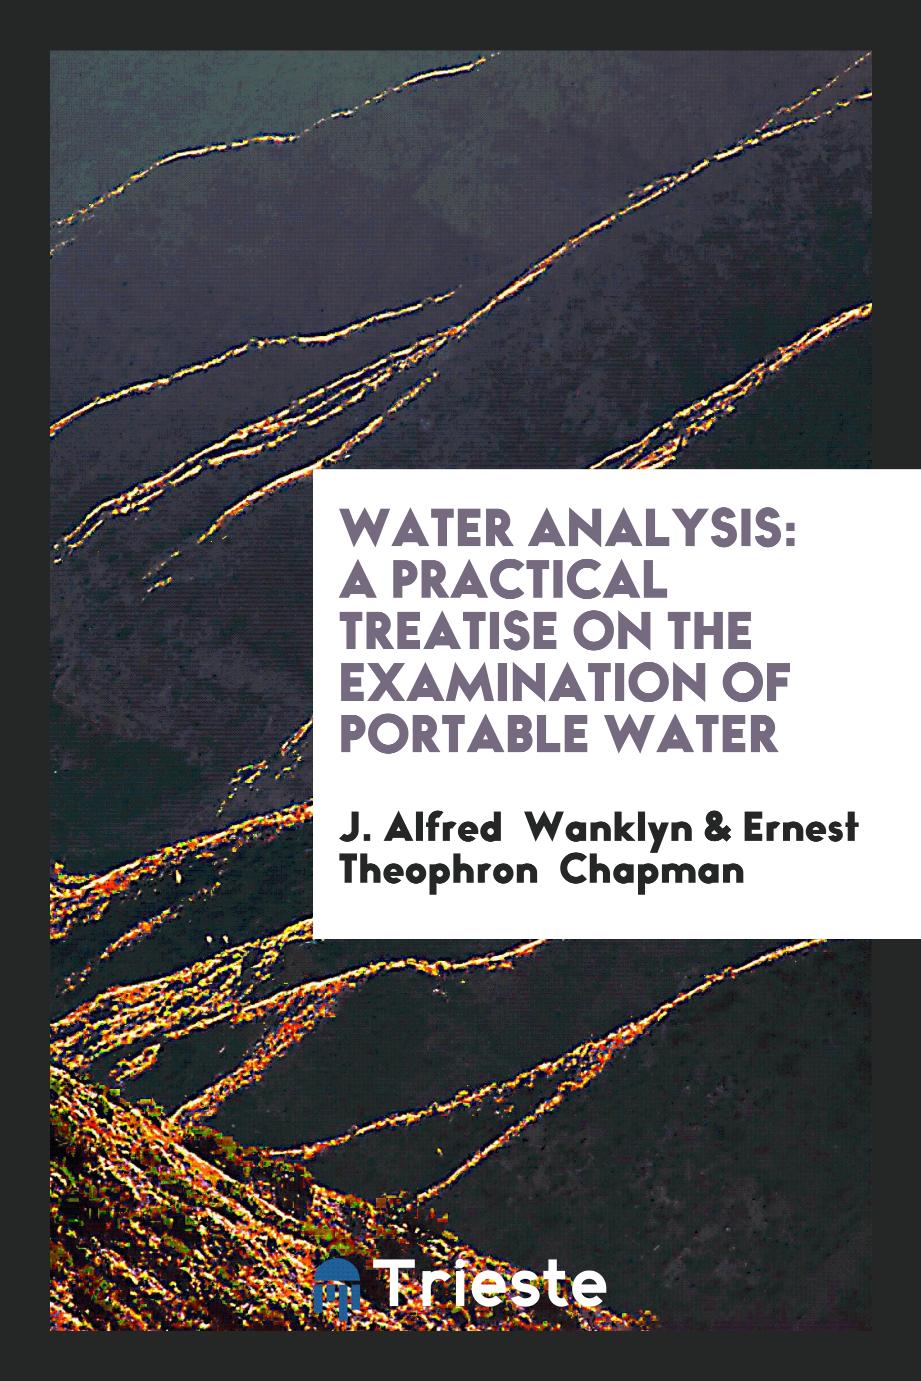 Water Analysis: A Practical Treatise on the Examination of Portable Water